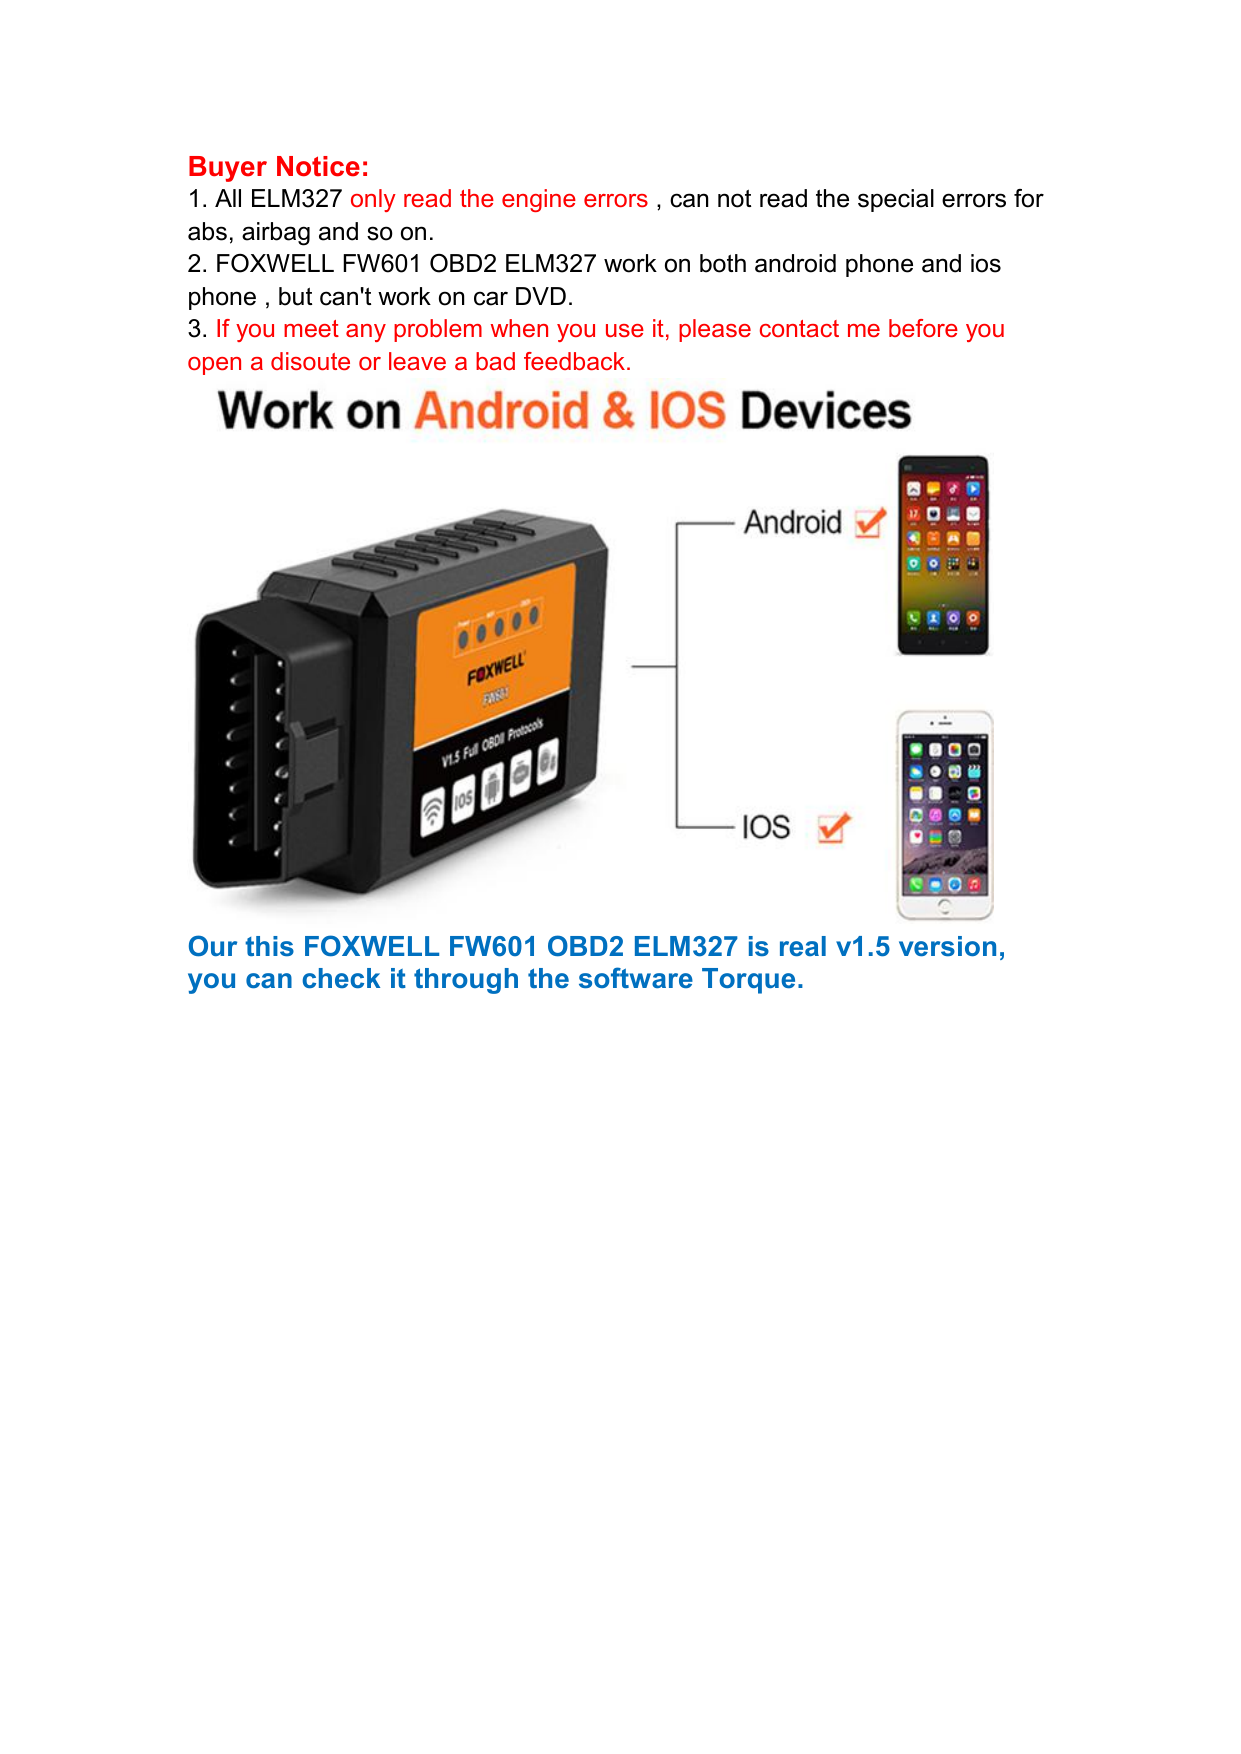 FOXWELL ELM327 OBD2 WiFi Diagnostic Scanner Tool iPhone Android Fits CHRYSLER 